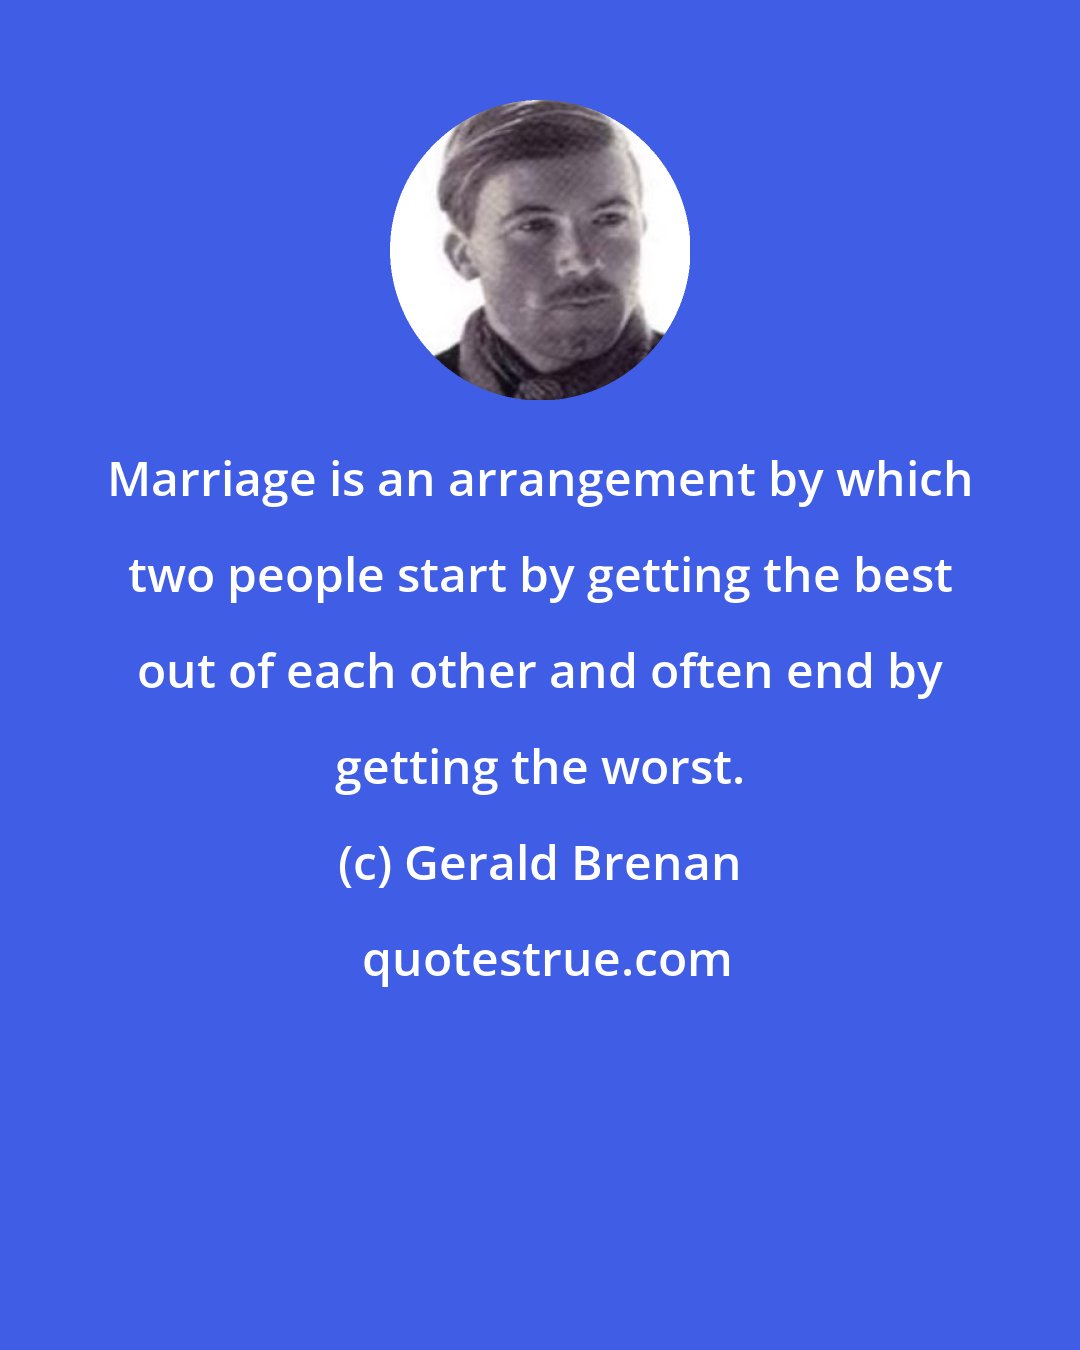 Gerald Brenan: Marriage is an arrangement by which two people start by getting the best out of each other and often end by getting the worst.